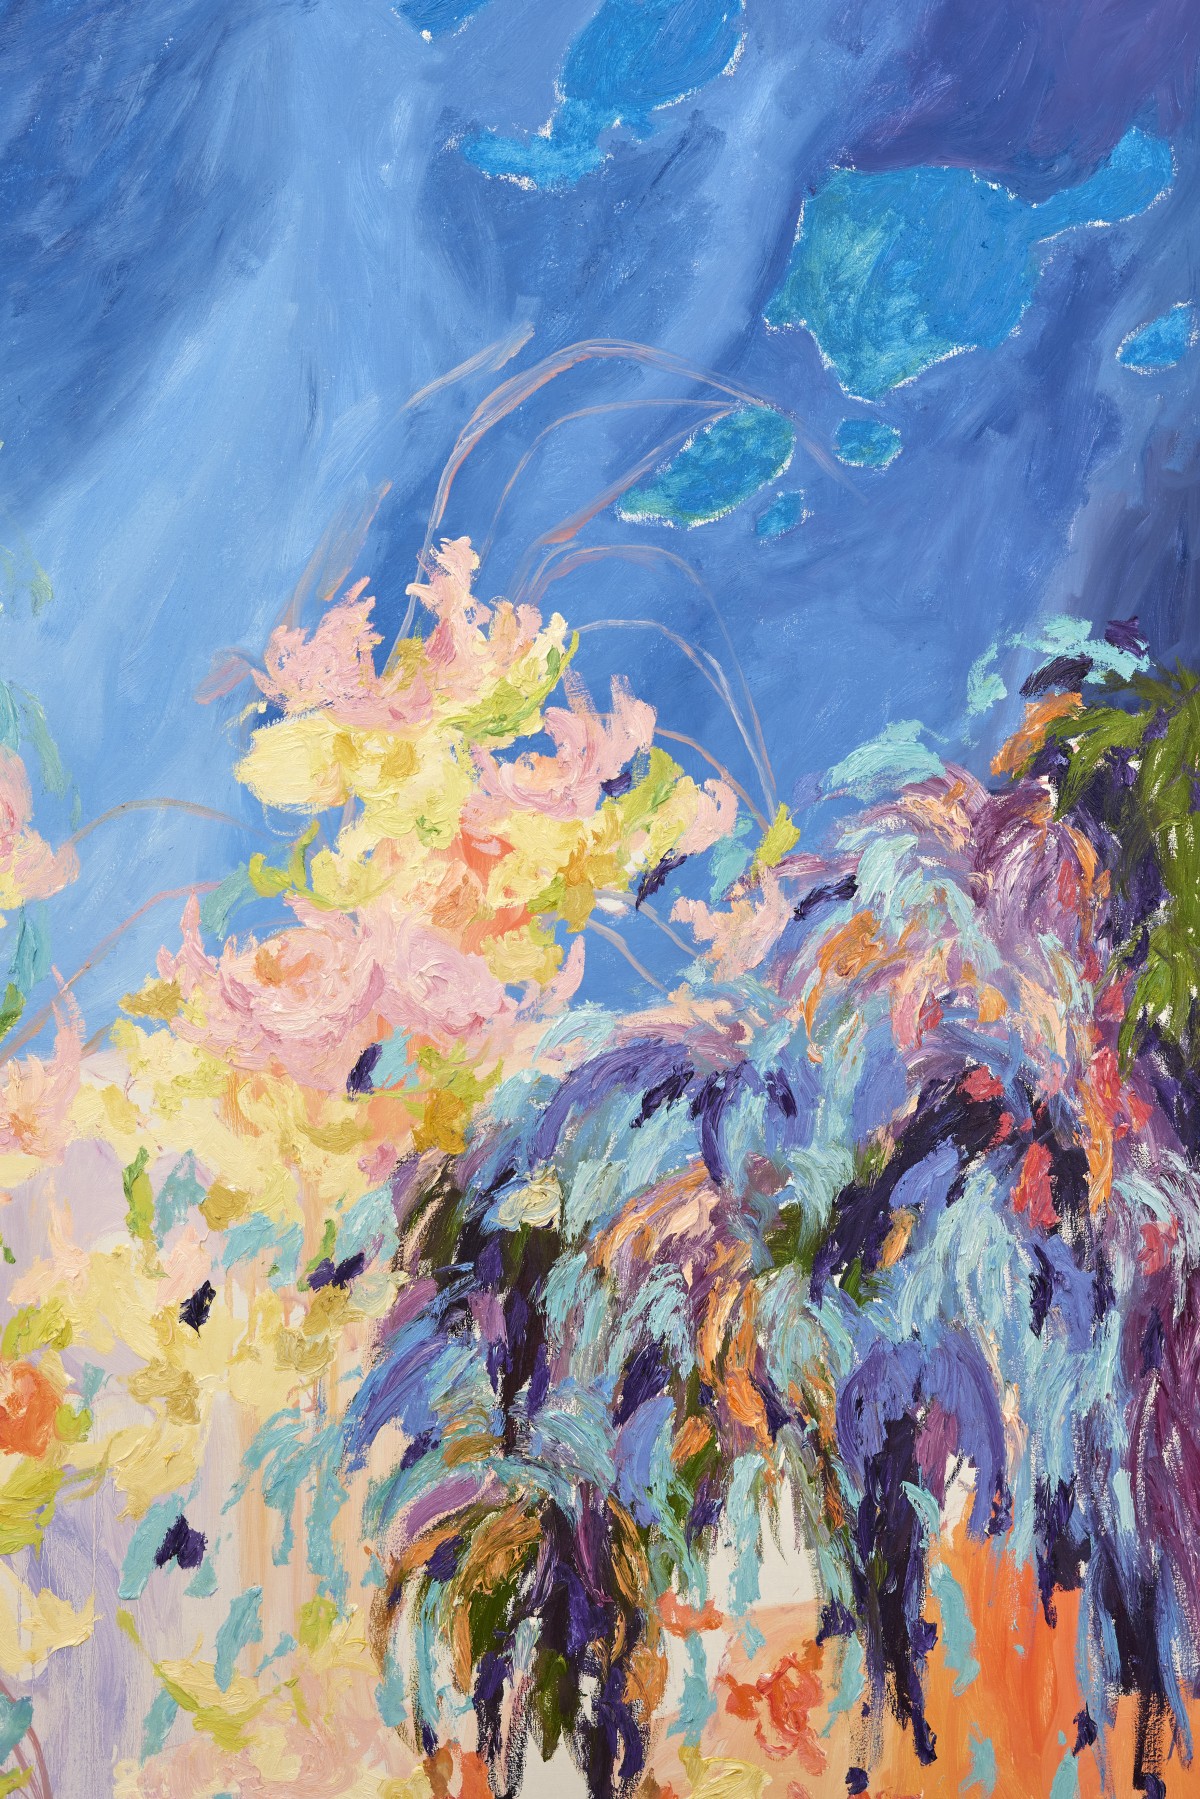 Detail of Macrantha, a Wildflower Fields painting by Arne Quinze